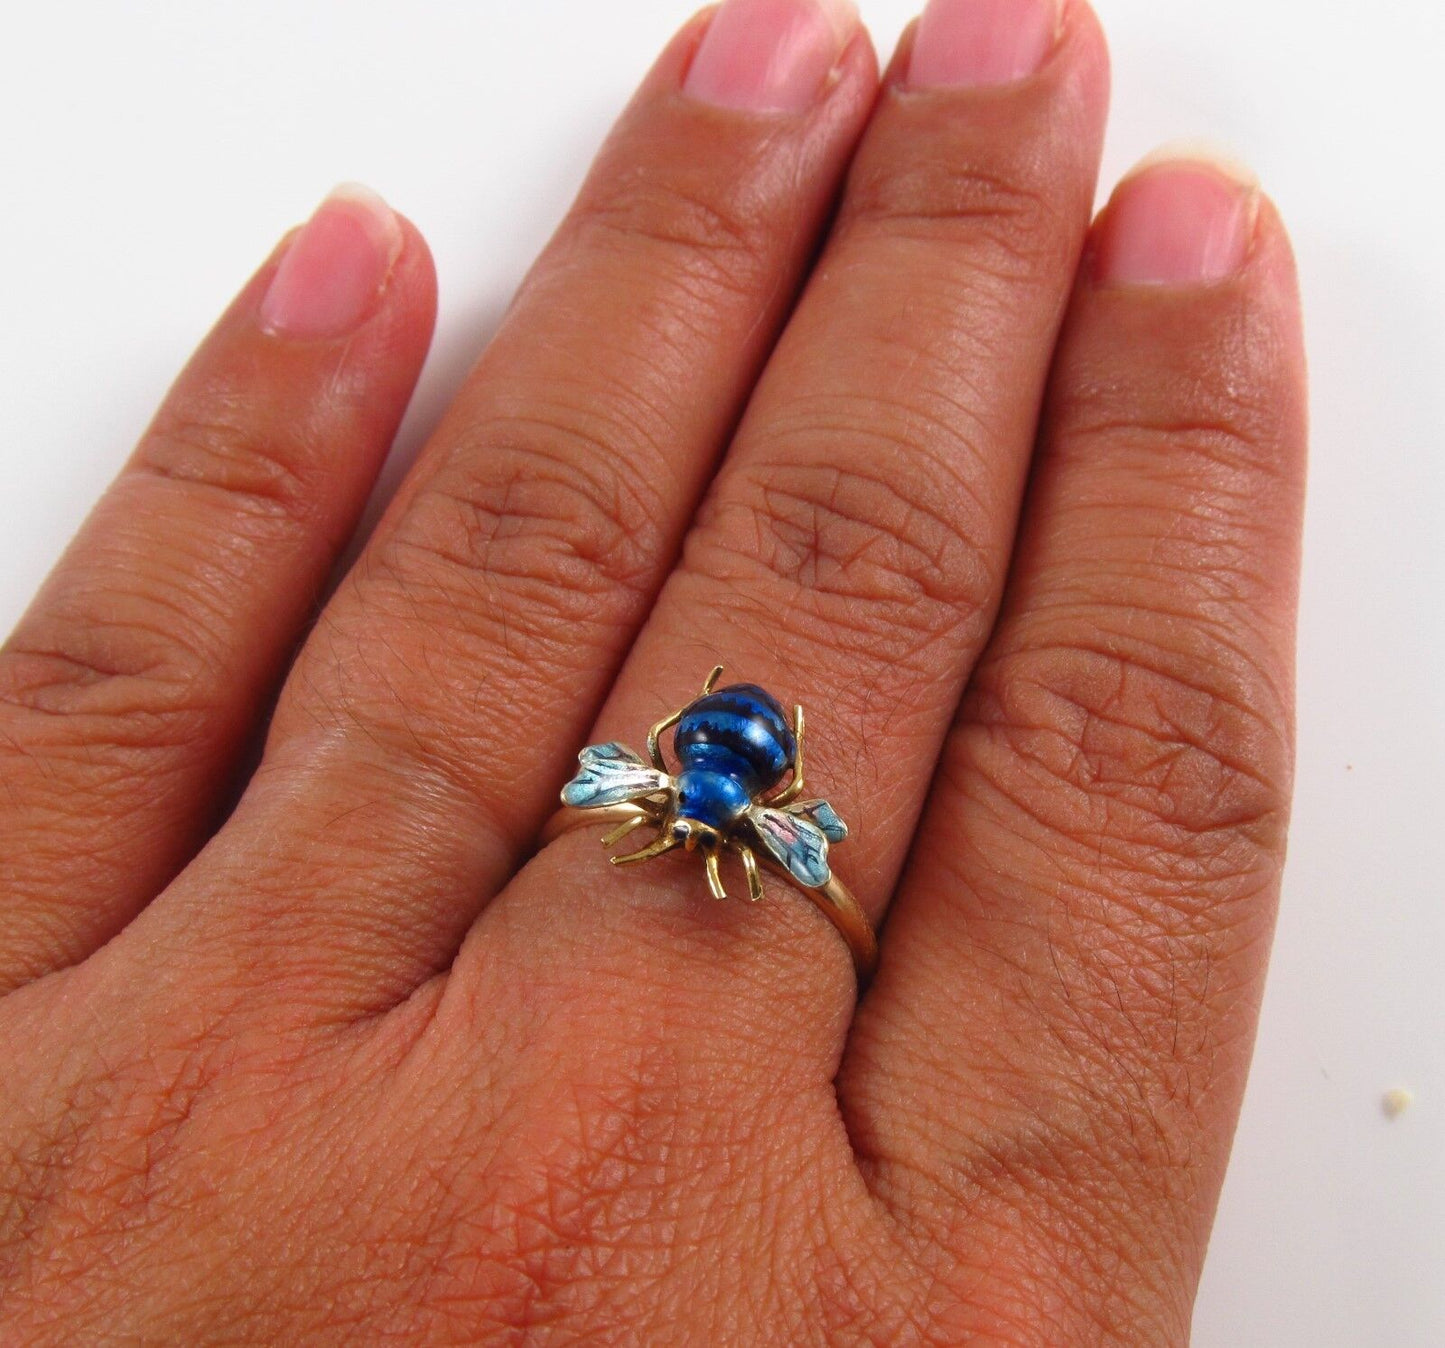 Vintage Ladies 14k Gold Blue Enamel Insect Bee Fly Conversion Ring Size 6.5